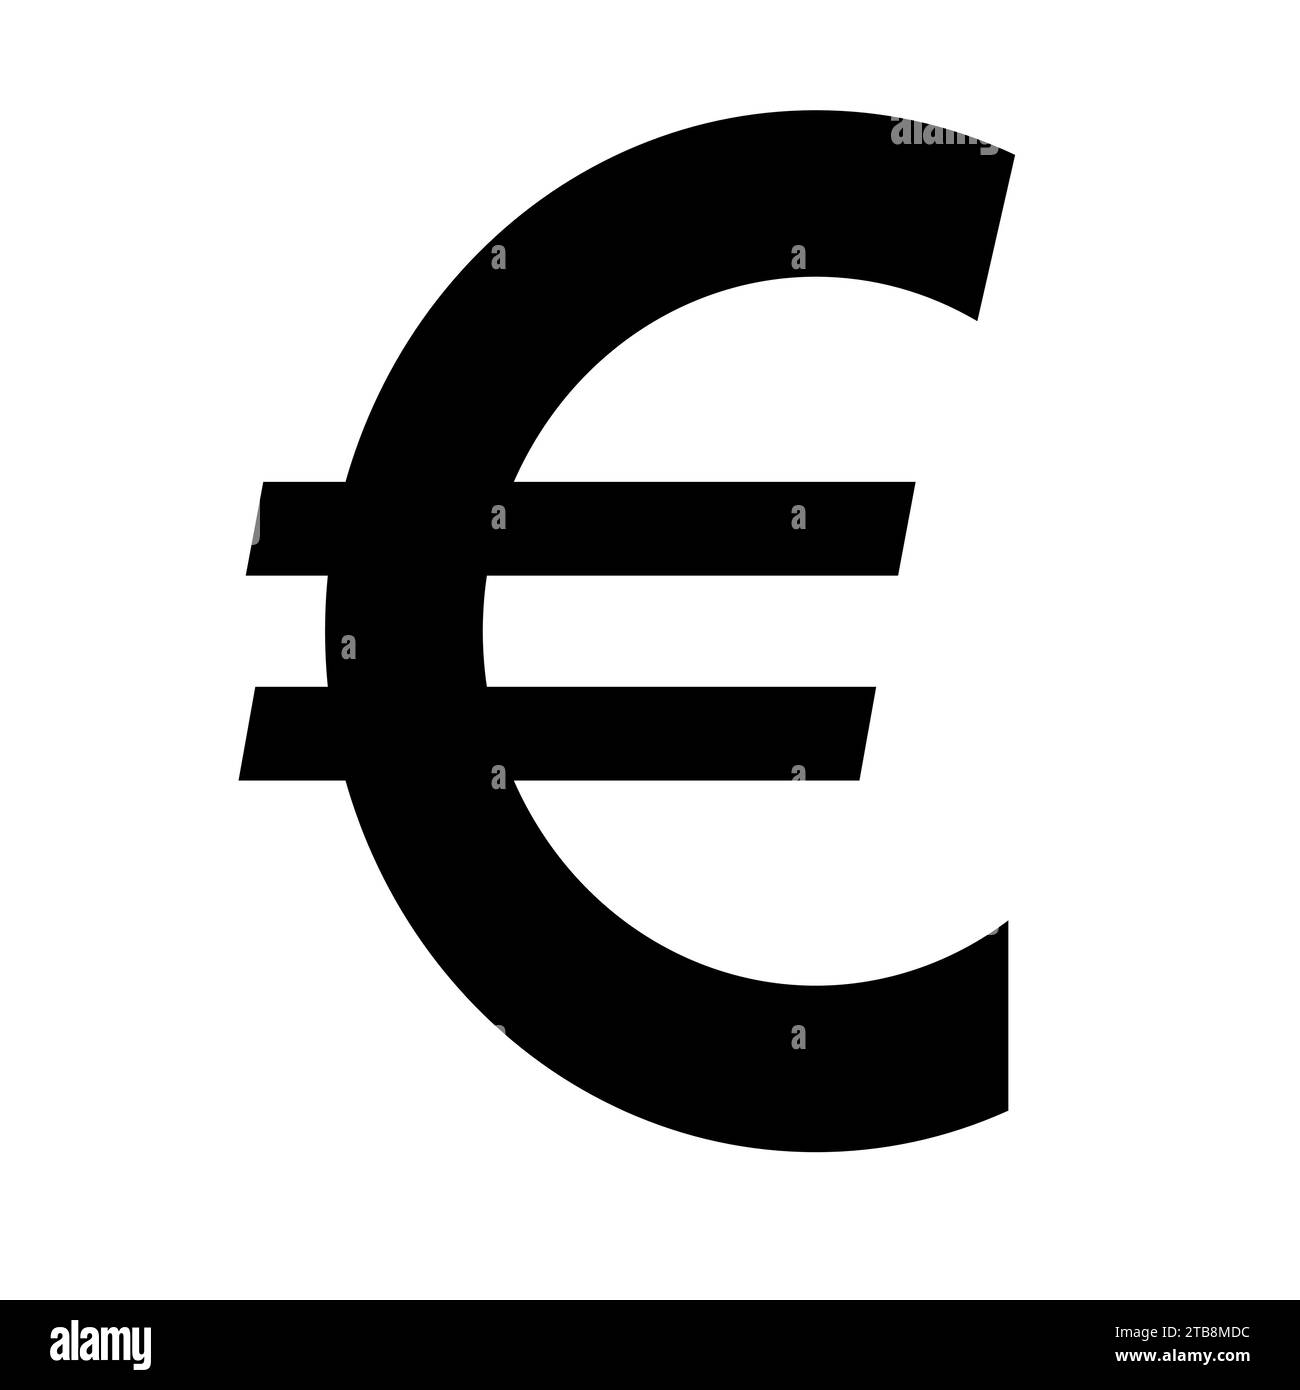 Euro symbol isolated in the white background Stock Vector